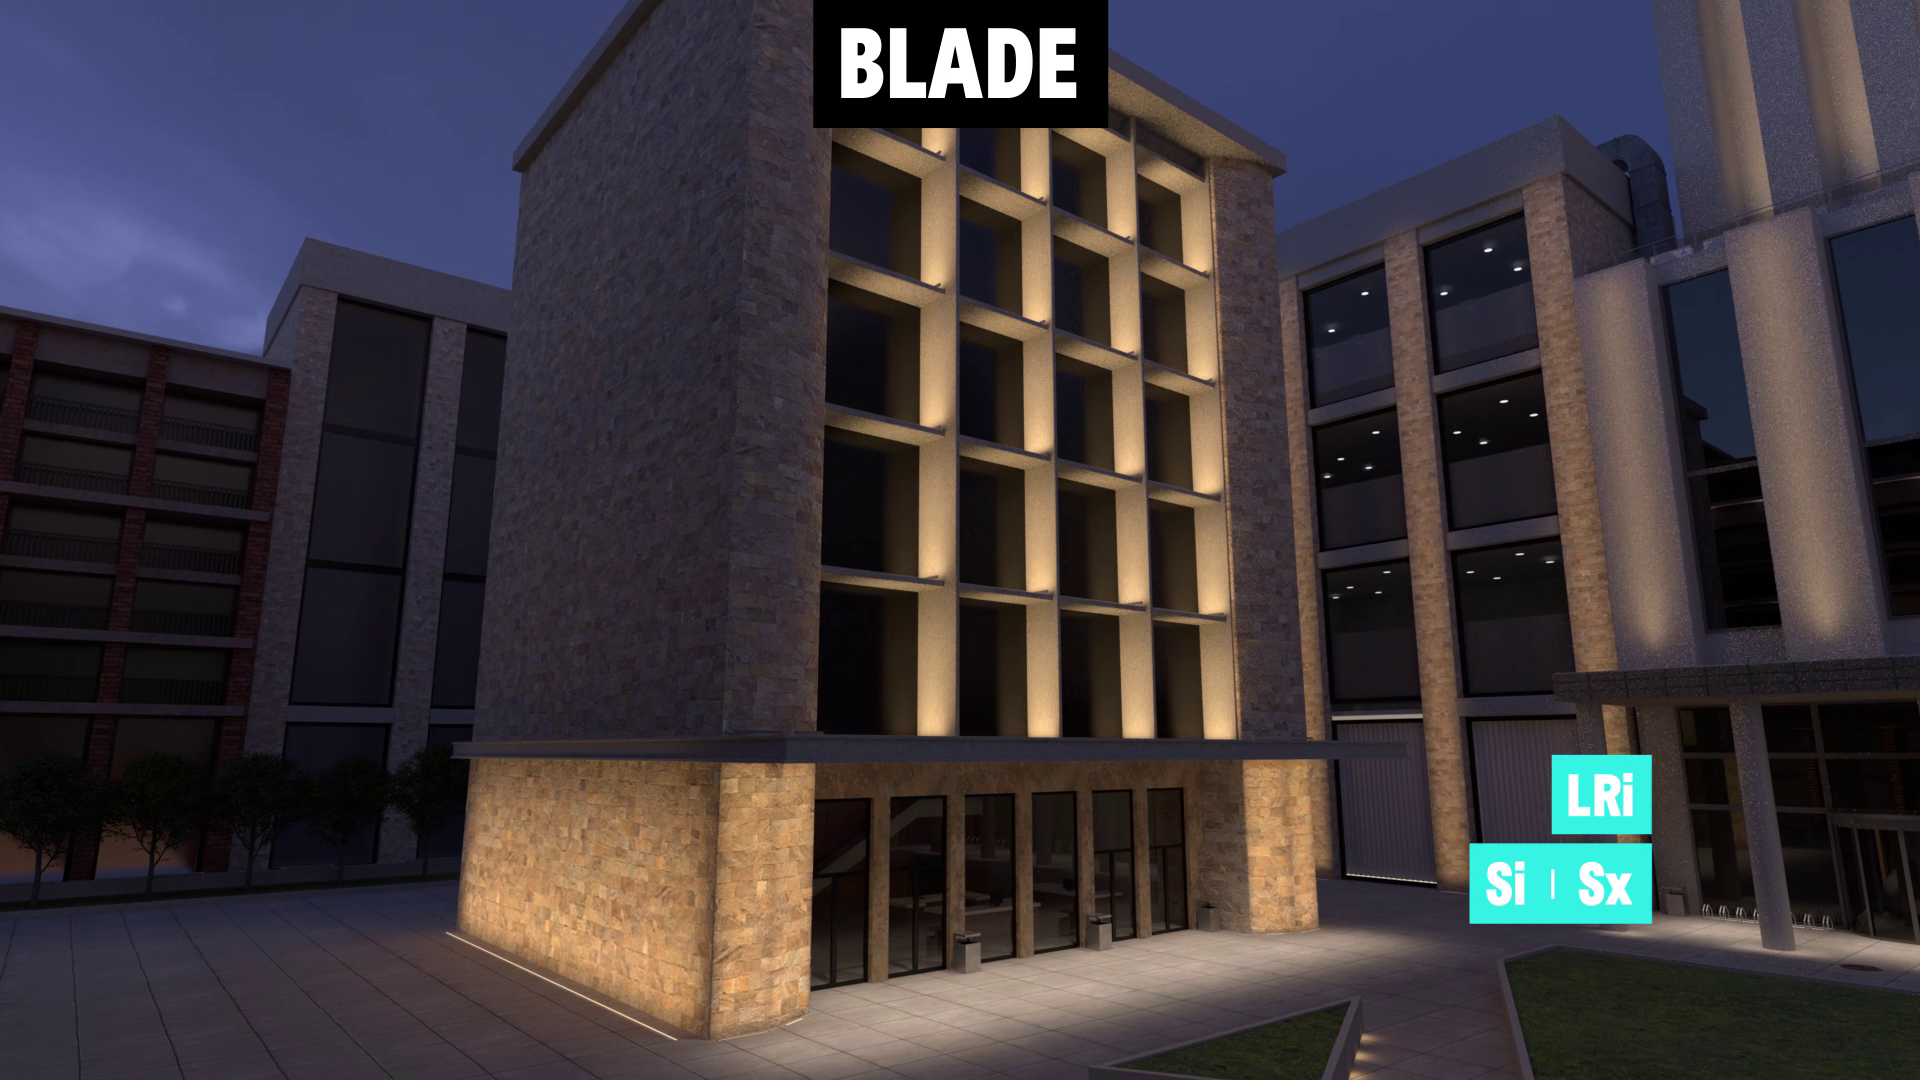 3D rendered image of a building lit with BLADE luminaires from acdc Lighting